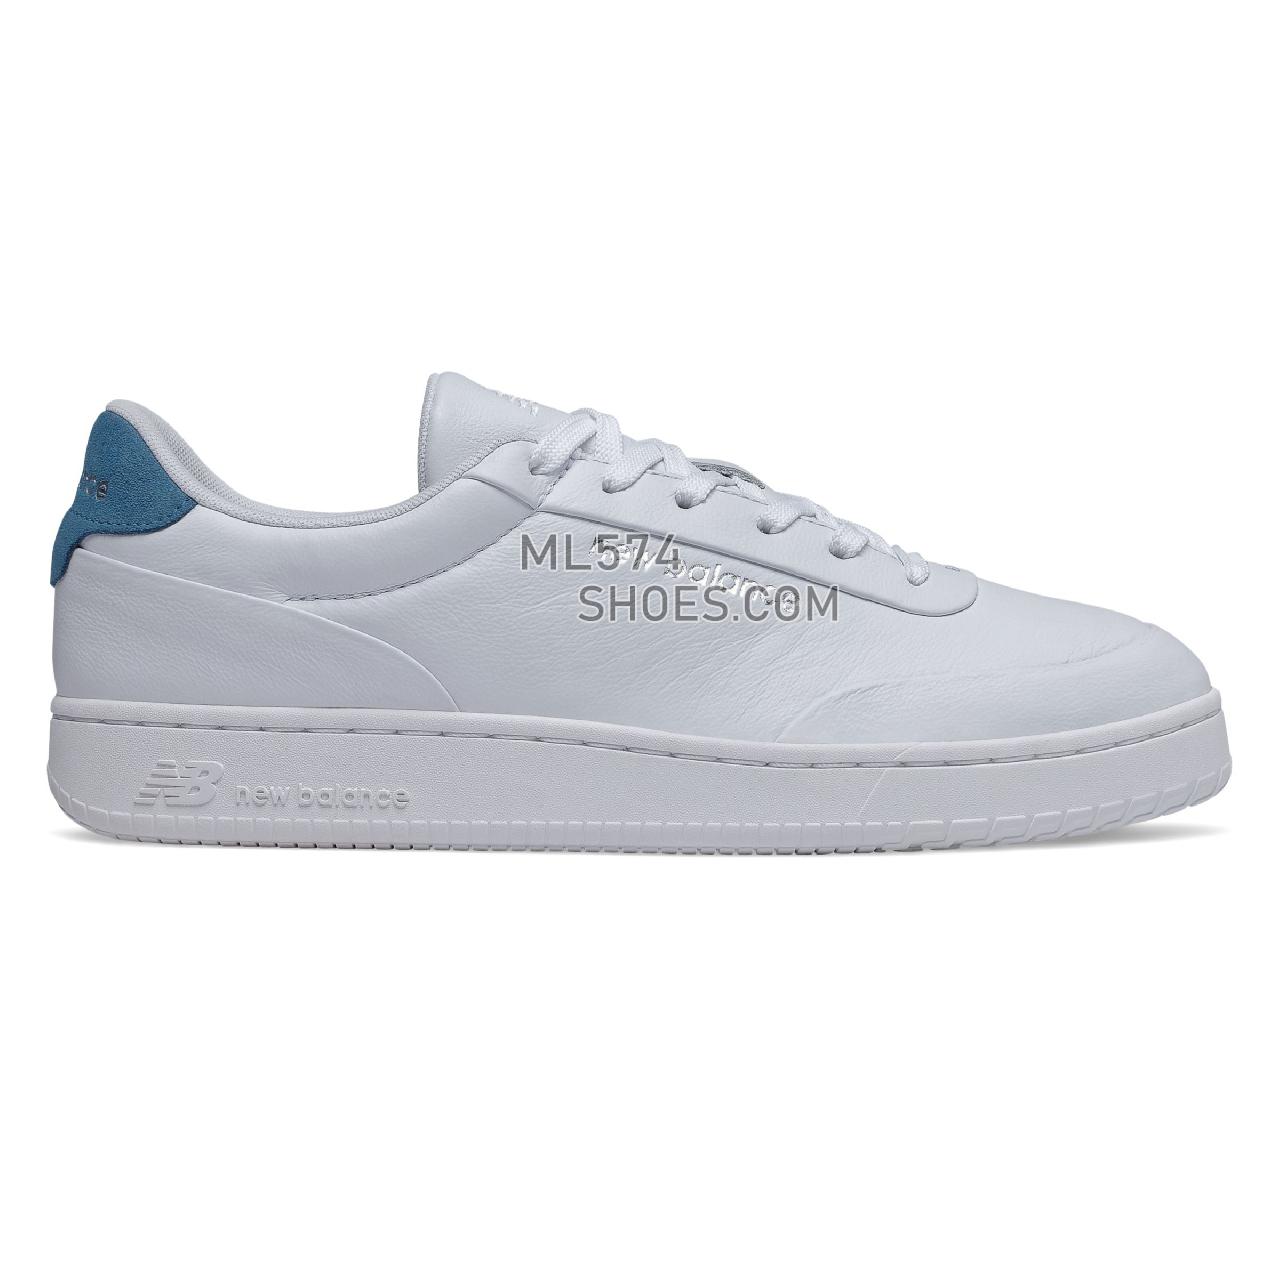 New Balance CT Alley - Men's Classic Sneakers - White with Blue - CTALYMAC